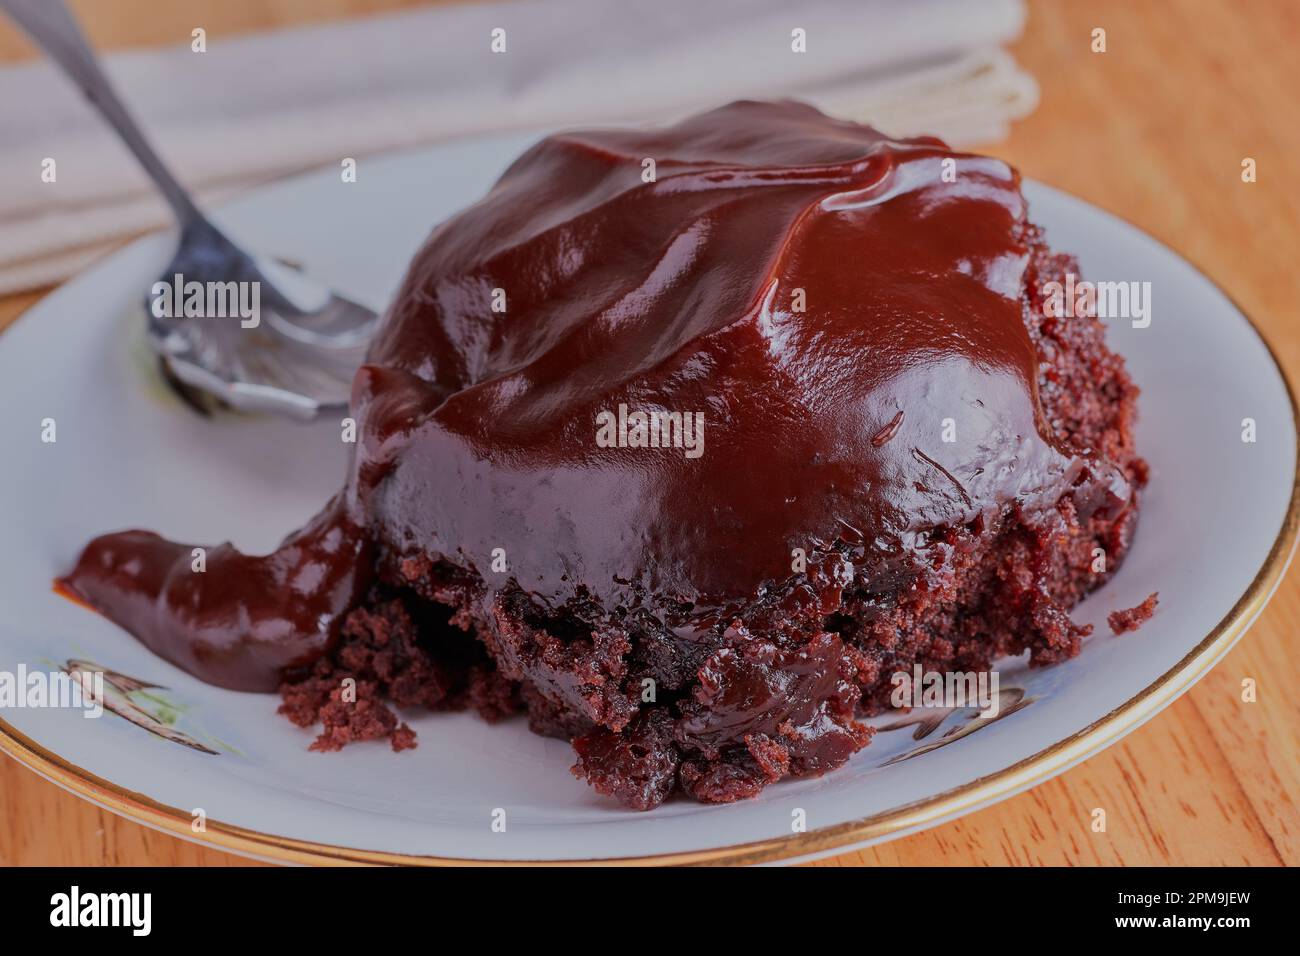 Helping of chocolate pudding on a white plate. Stock Photo